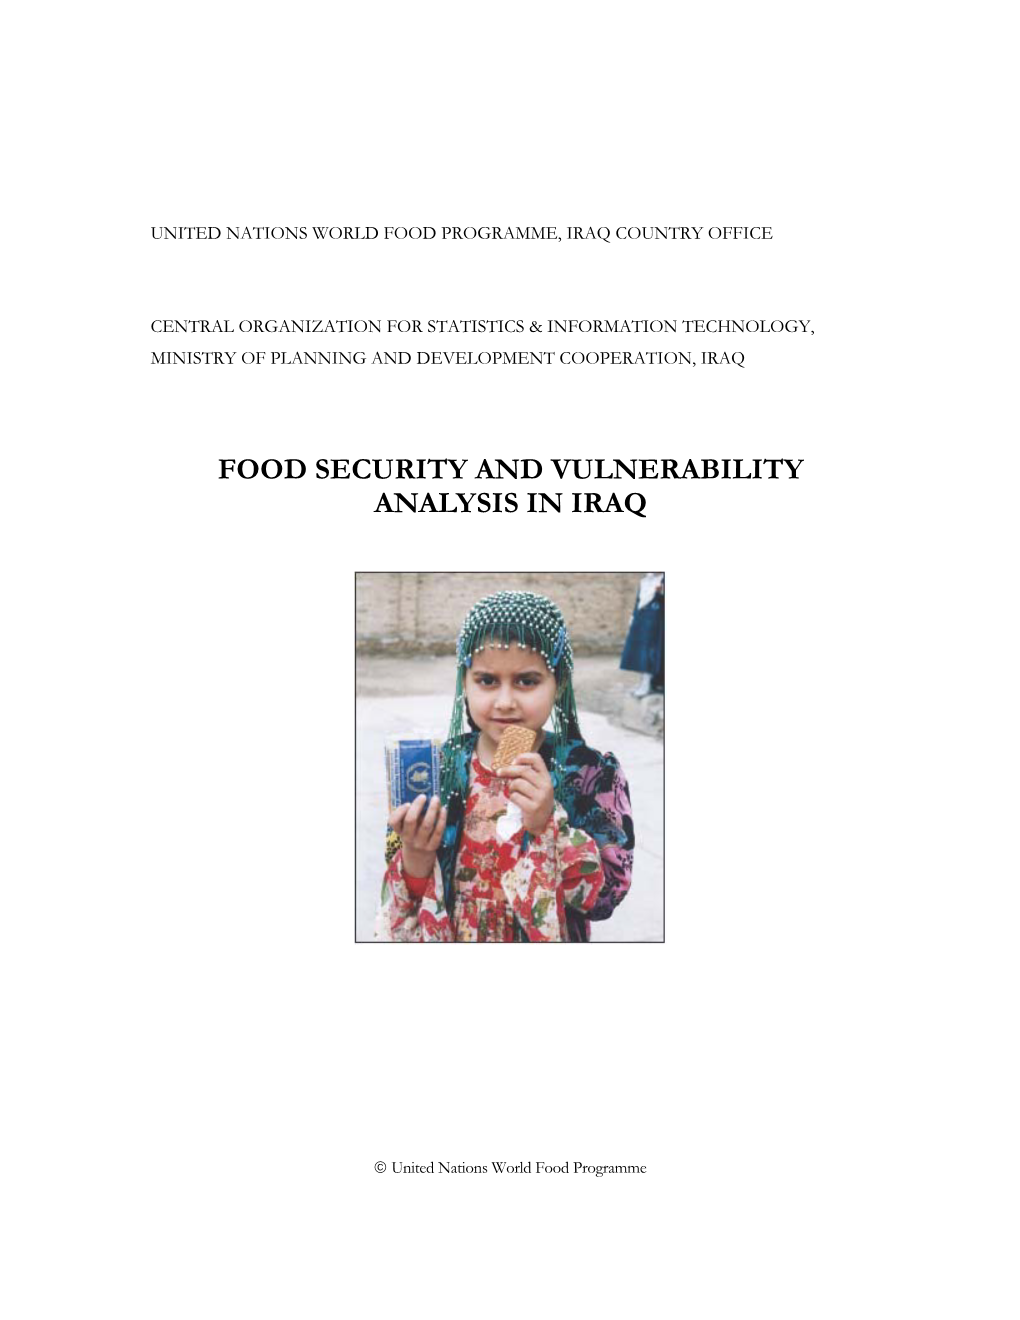 Food Security and Vulnerability Analysis in Iraq